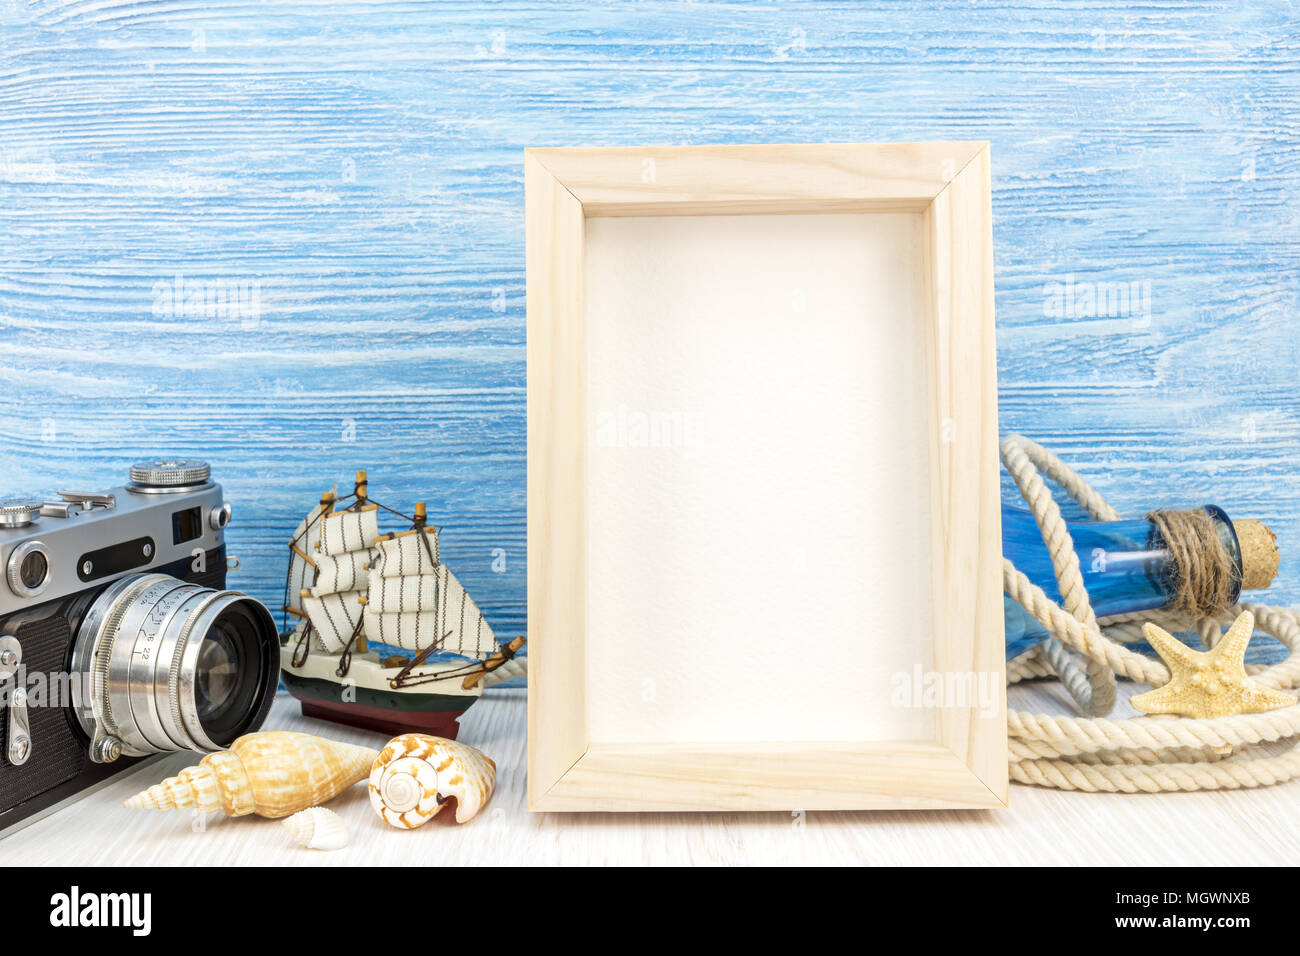 summer holiday background - empty photo frame with classic camera, ship and seashells against blue wooden planks Stock Photo